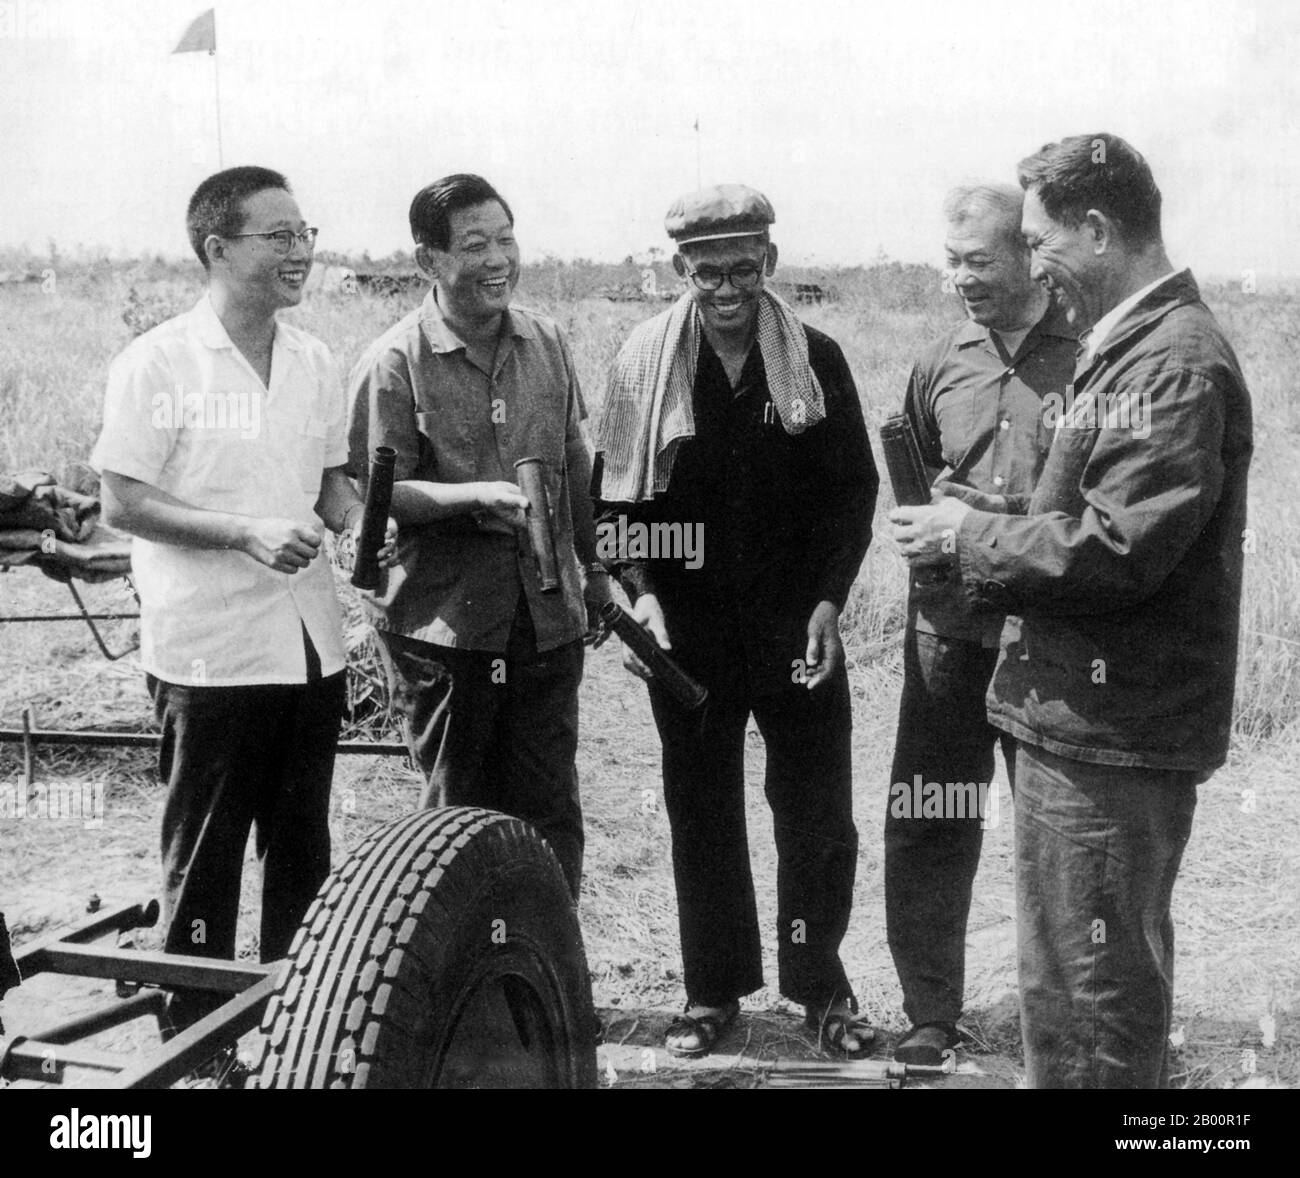 Cambodia: Son Sen (June 12, 1930 – June 10, 1997), Defense Minister of Democratic Kampuchea, with Chinese advisors.  Son Sen (June 12, 1930 – June 10, 1997), member of the Central Committee of the Communist Party of Kampuchea, aka the Khmer Rouge, from 1974 to 1992, Sen oversaw the Party's security apparatus, including the Santebal secret police and the notorious security prison S-21 at Tuol Sleng. Son Sen was married to Yun Yat, who became the Party's Minister of Education and Information. Along with the rest of his family, he was killed on the orders of Pol Pot during a 1997 factional split. Stock Photo